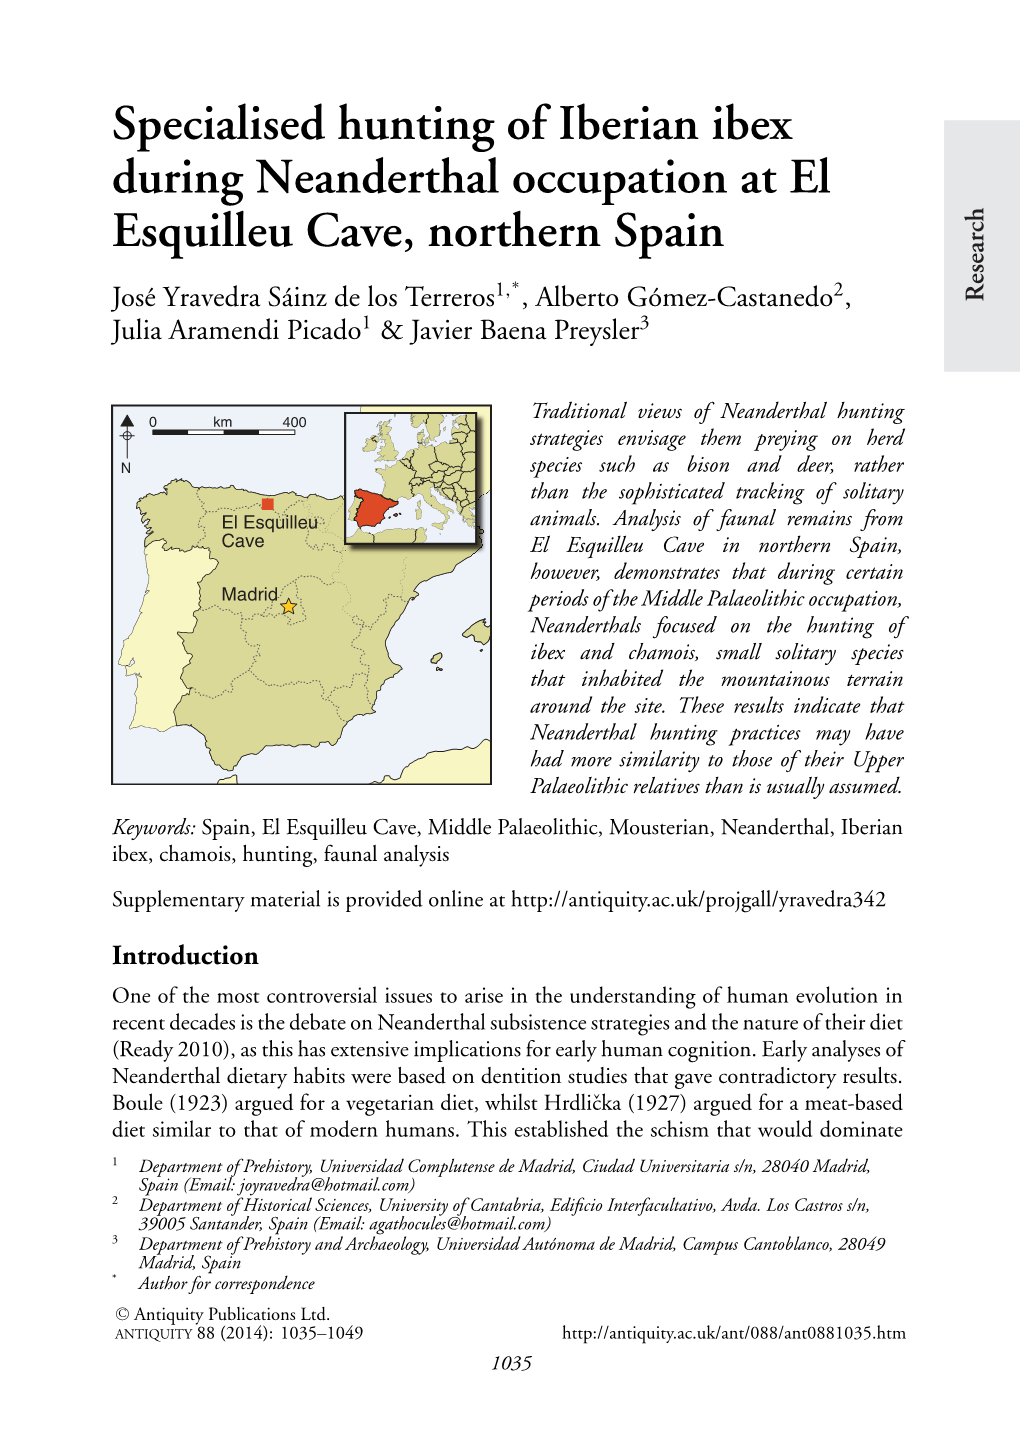 Specialised Hunting of Iberian Ibex During Neanderthal Occupation at El Esquilleu Cave, Northern Spain the ﬁeld